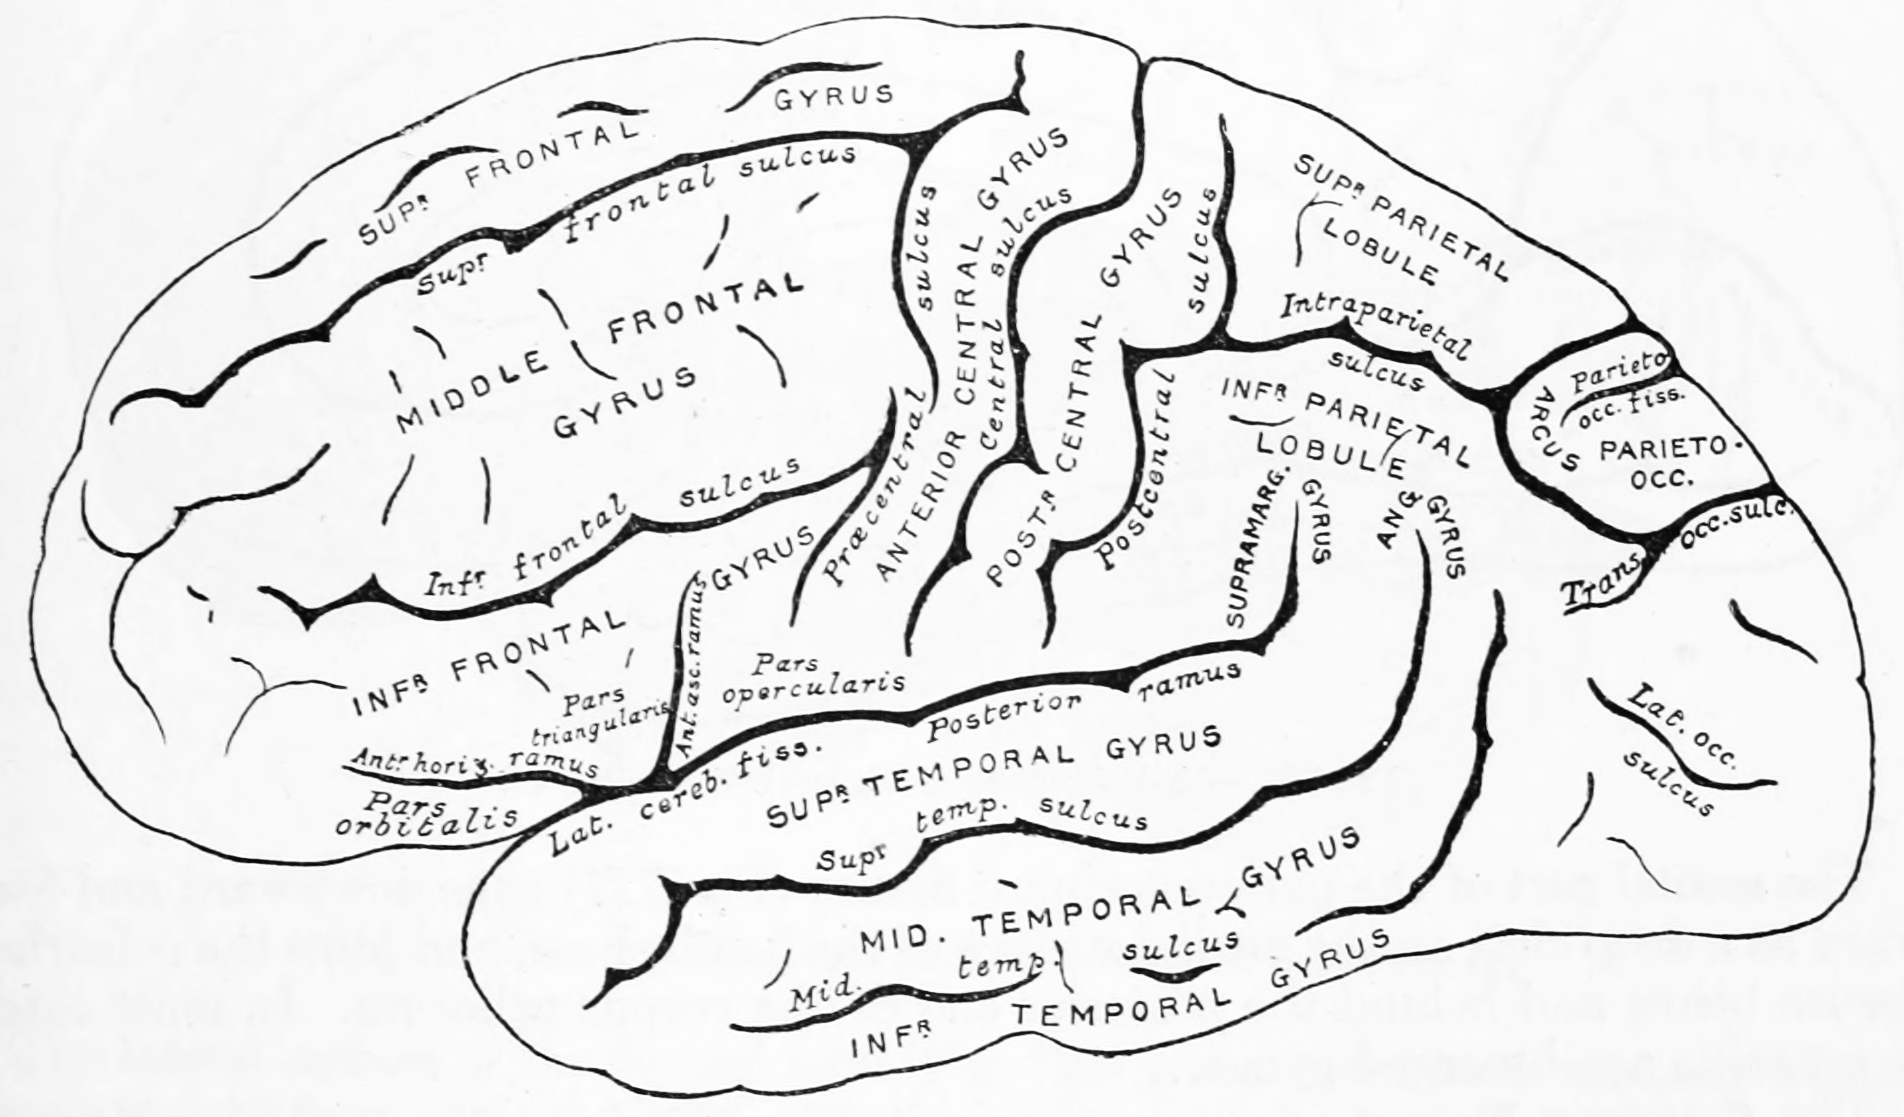 Diagram showing a lateral view of the ridges (gyri) and grooves (sulci) of the left hemisphere of the brain. From Gray Henry, Anatomy of the Human Body. 20th Edition, Lea & Febiger, Philadelphia & New York, 1918